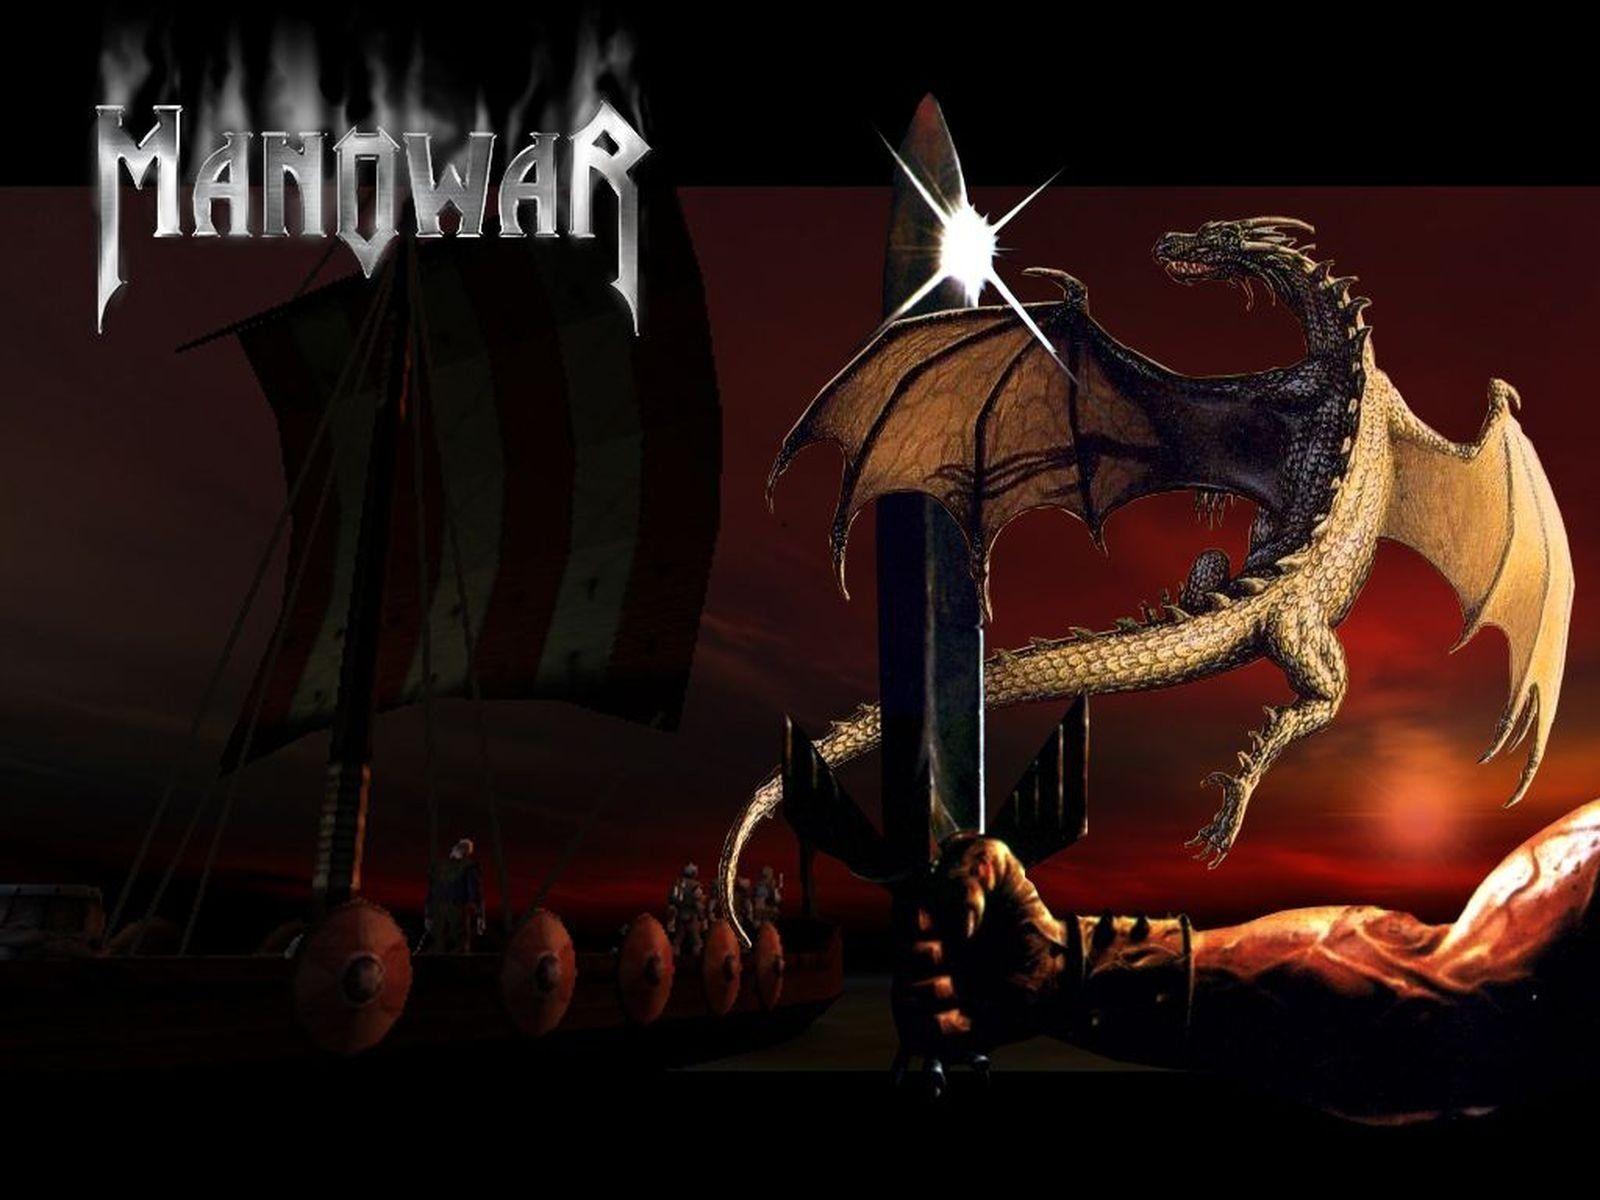 manowar warriors of the world united free mp3 download